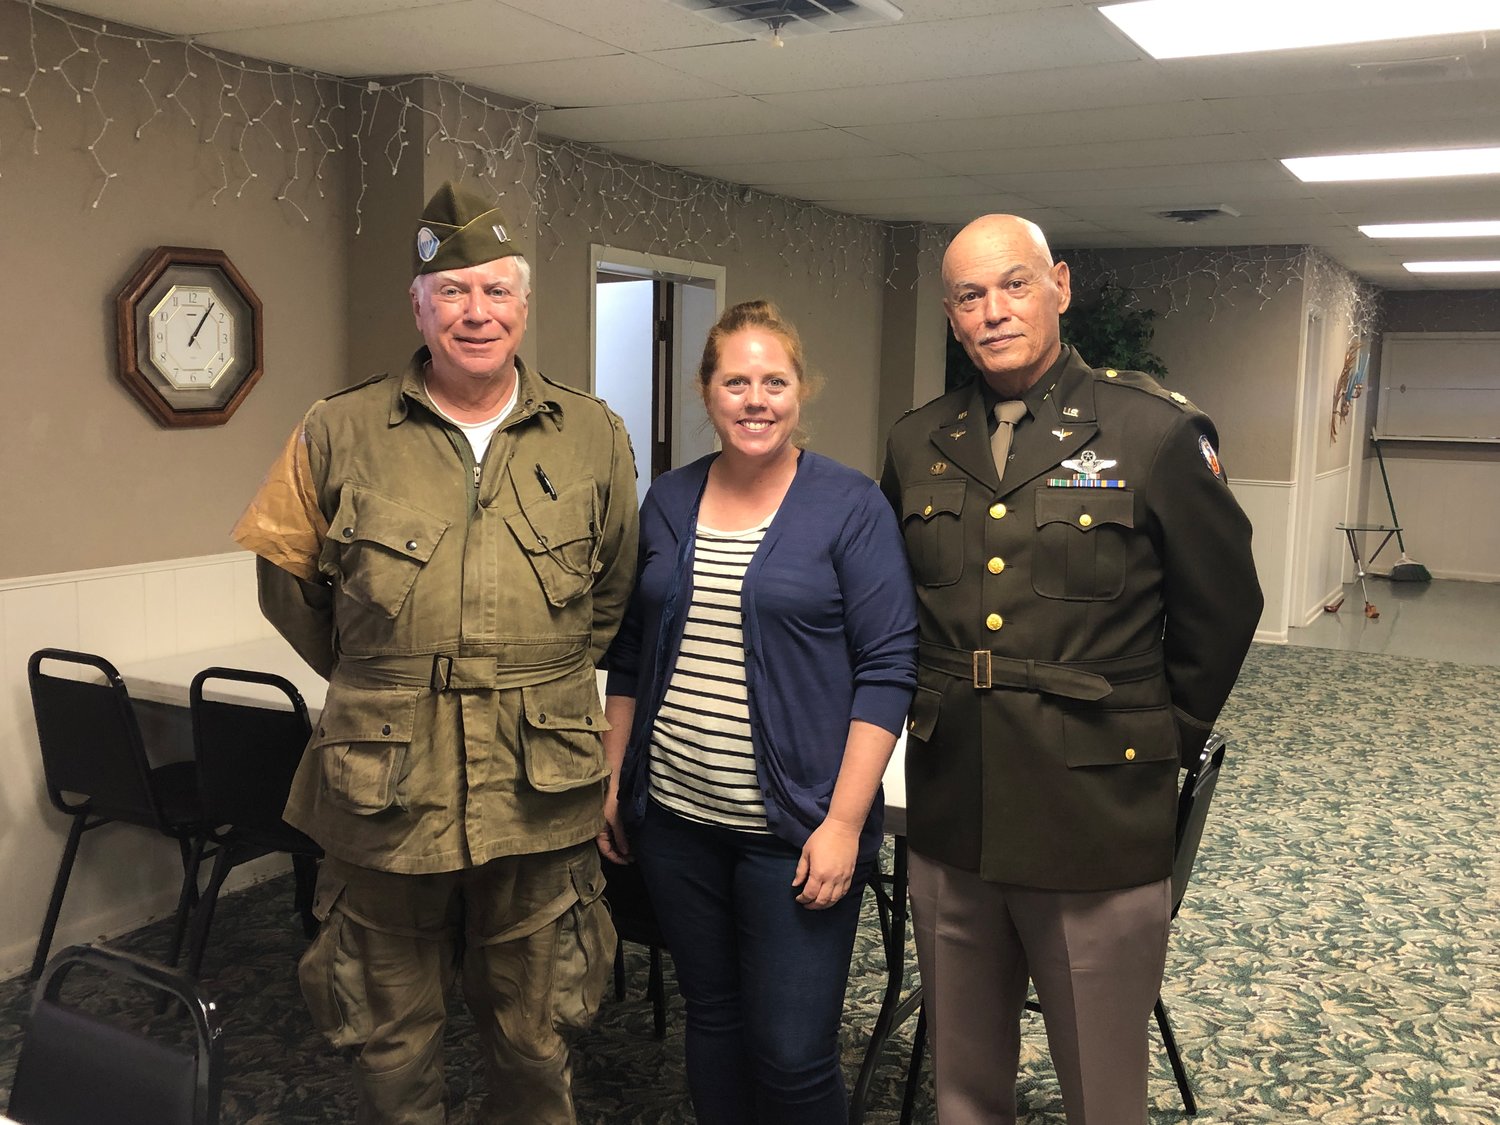 The Frederick Rotary Club was honored to have Mark Howard (left) and Dave Brothers (right) from the WWII Airborne Demonstration Team as their guests on Tuesday. Dave spoke about the mission of the team, their future plans, and opportunities both the team and the community have to grow. They are pictured with club President Cacy Caldwell.